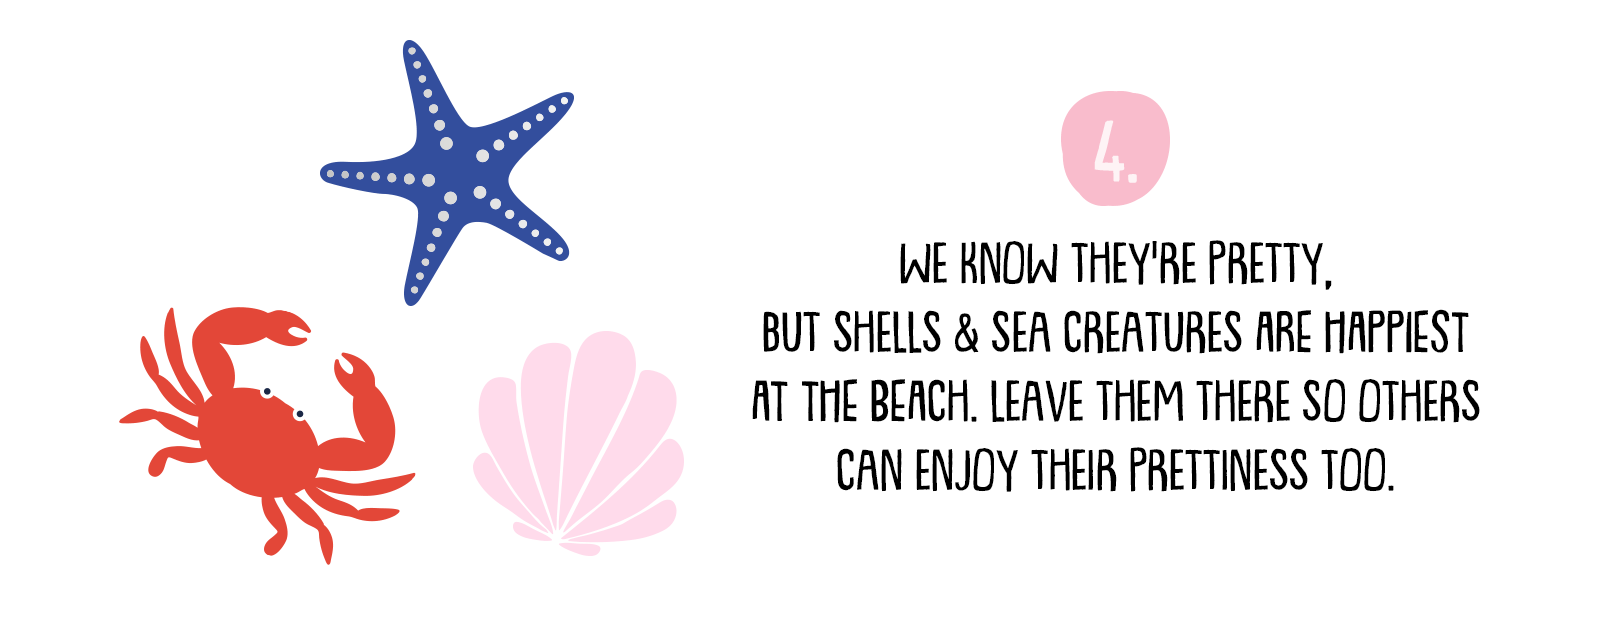 Leave shells at the beach